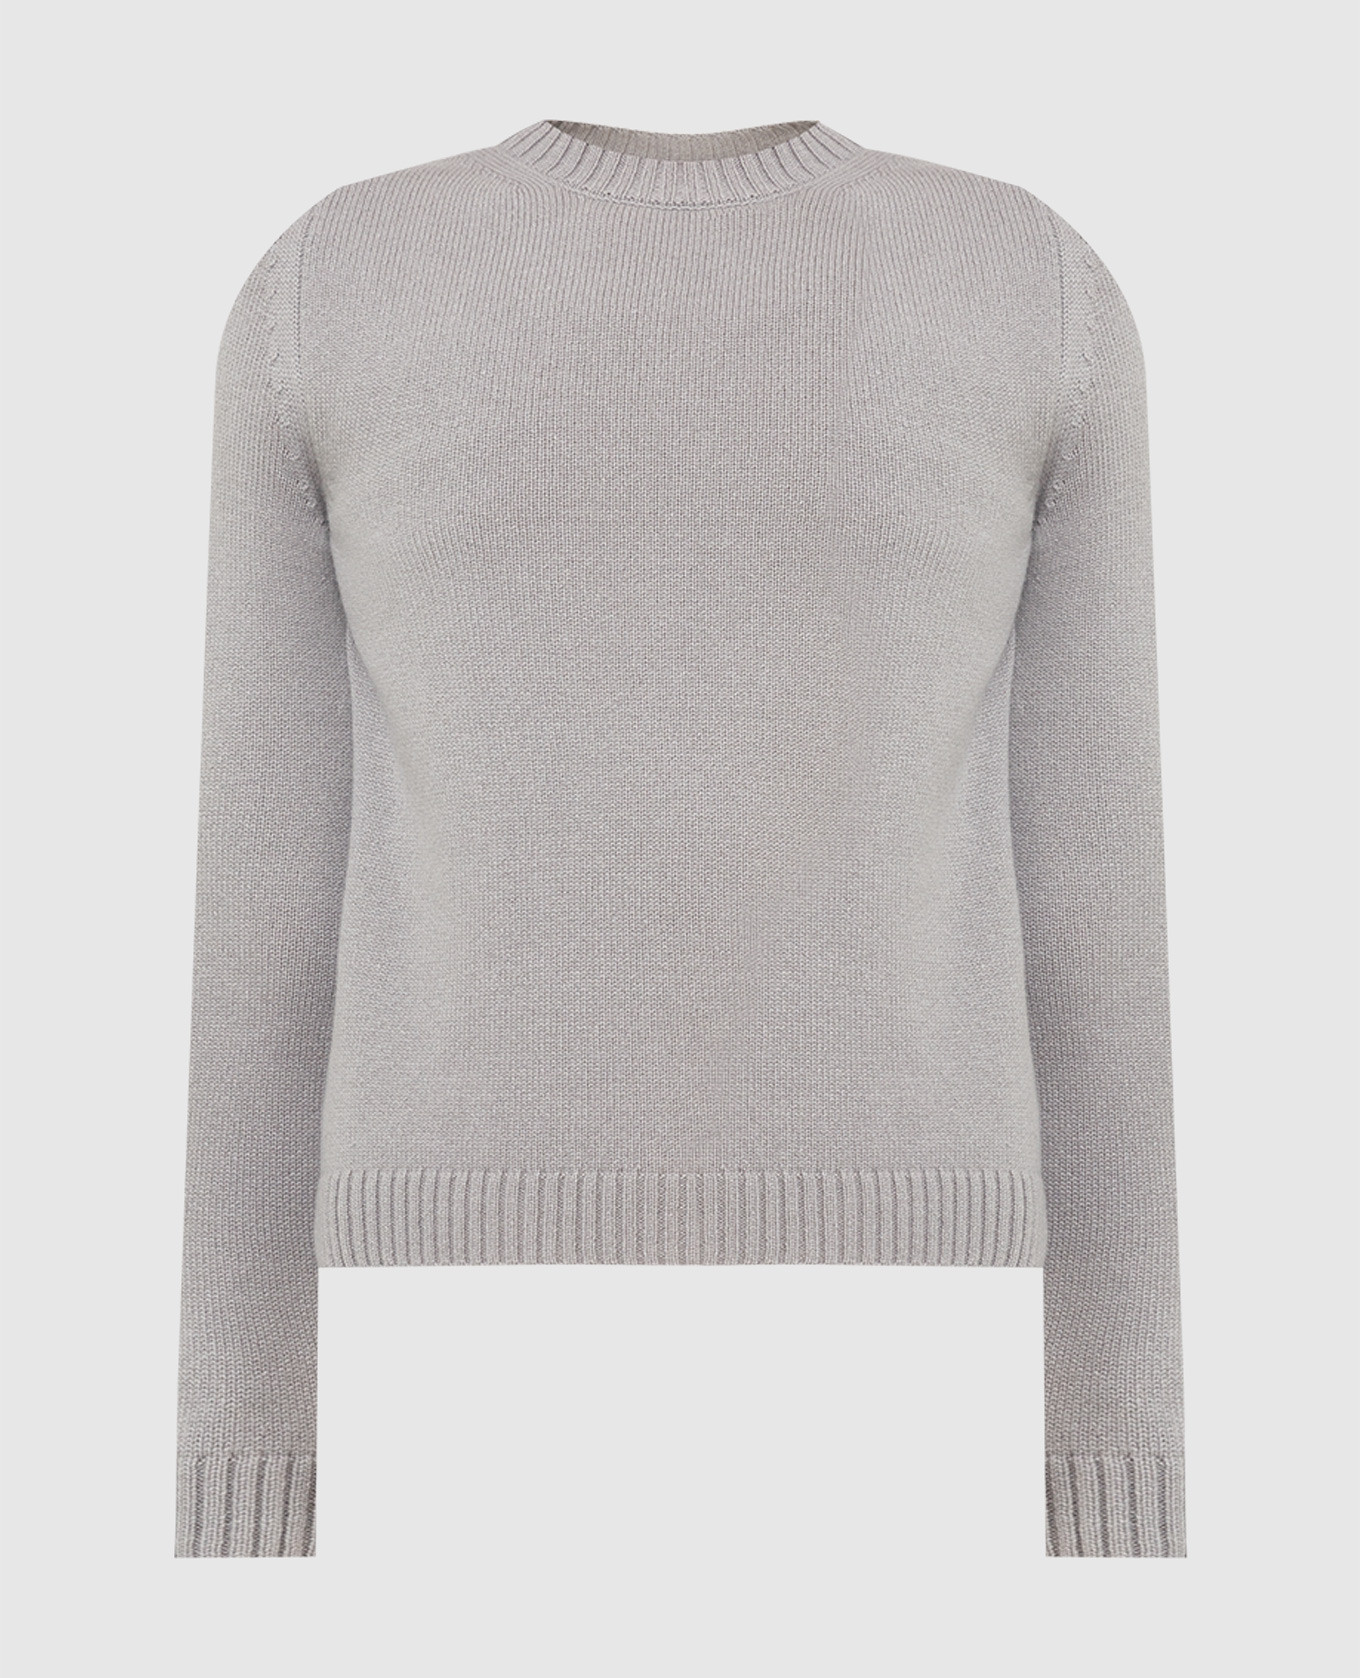 Gray cashmere jumper with slits